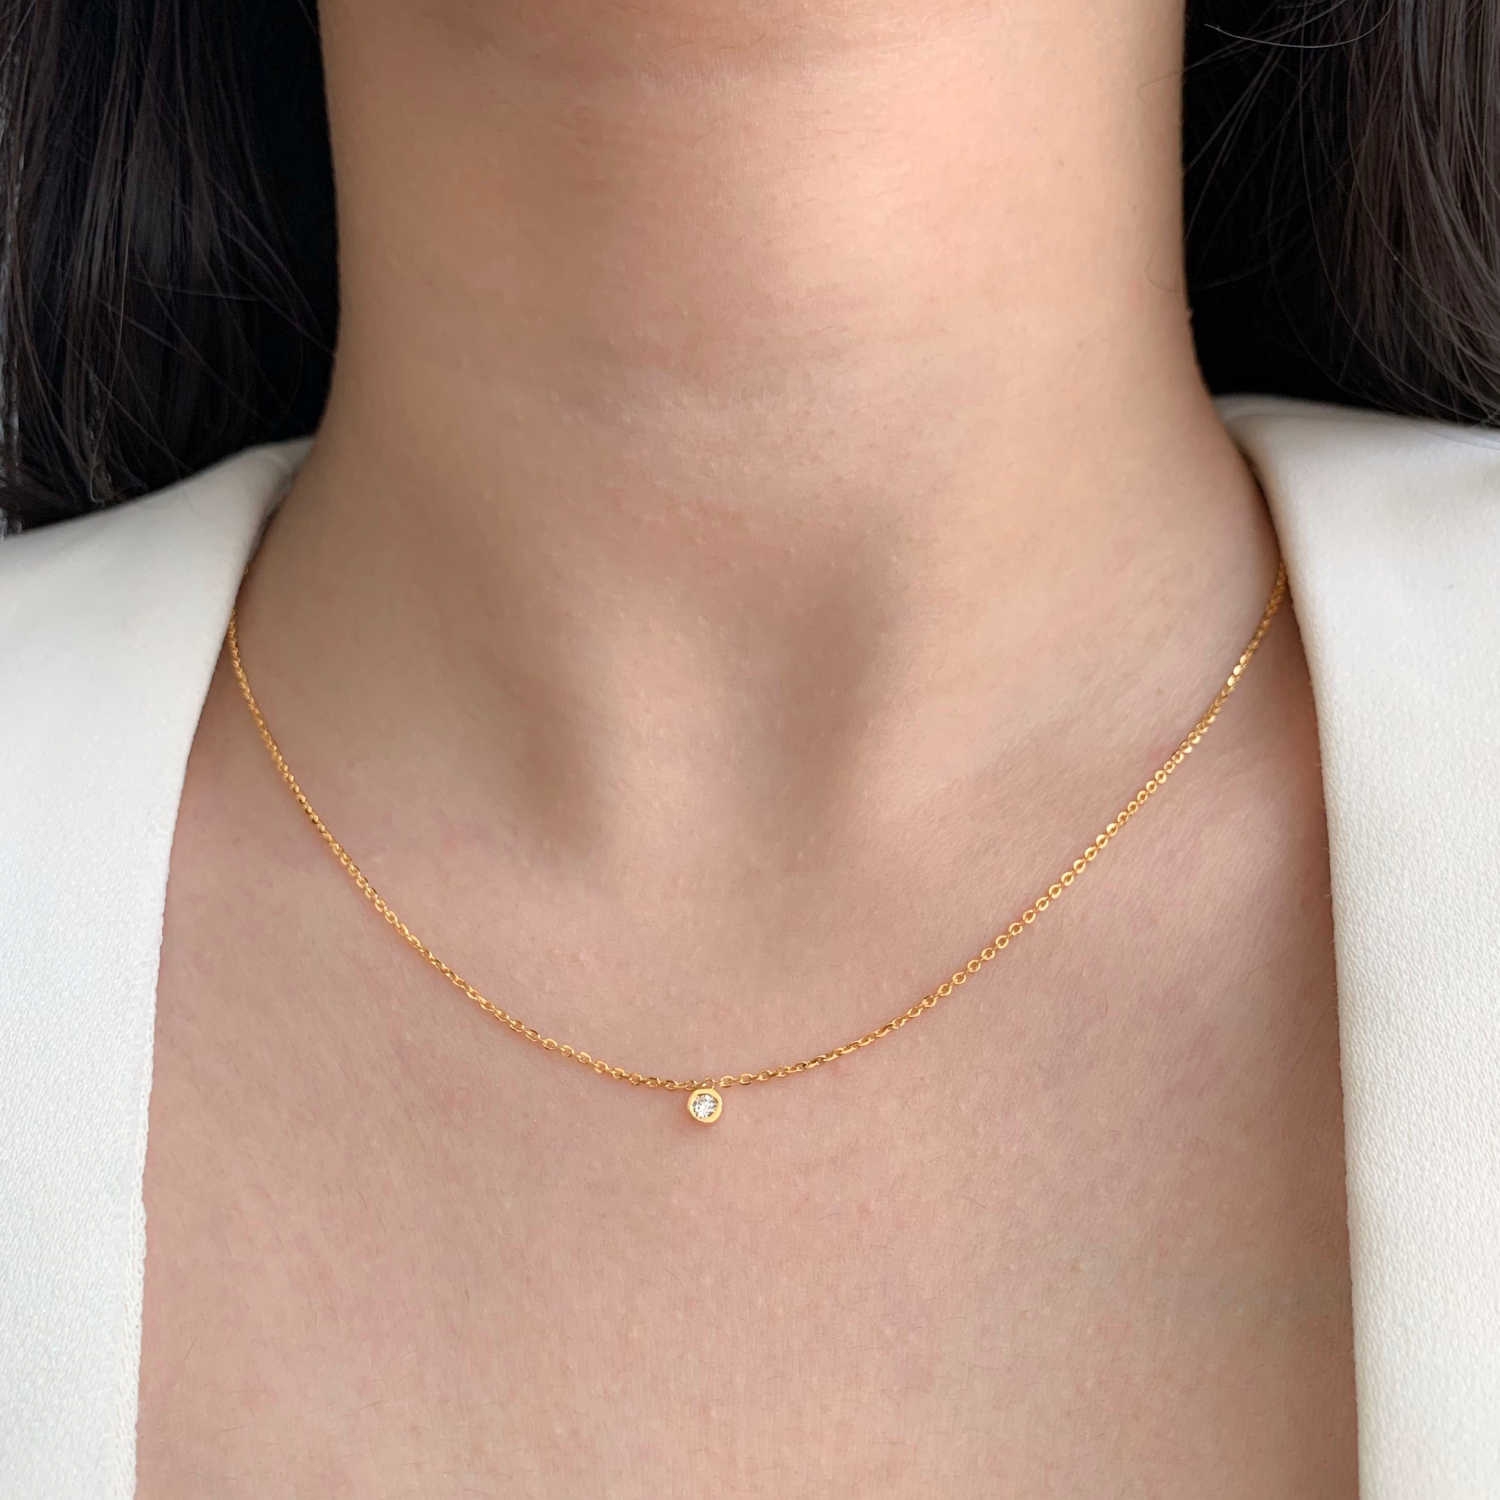 Buy Necklace Plain Chain Dainty Thin Chain Choker Necklace Layering Necklace  Delicate Chain Necklace Simple Chain Necklace Basic Chain Online in India -  Etsy